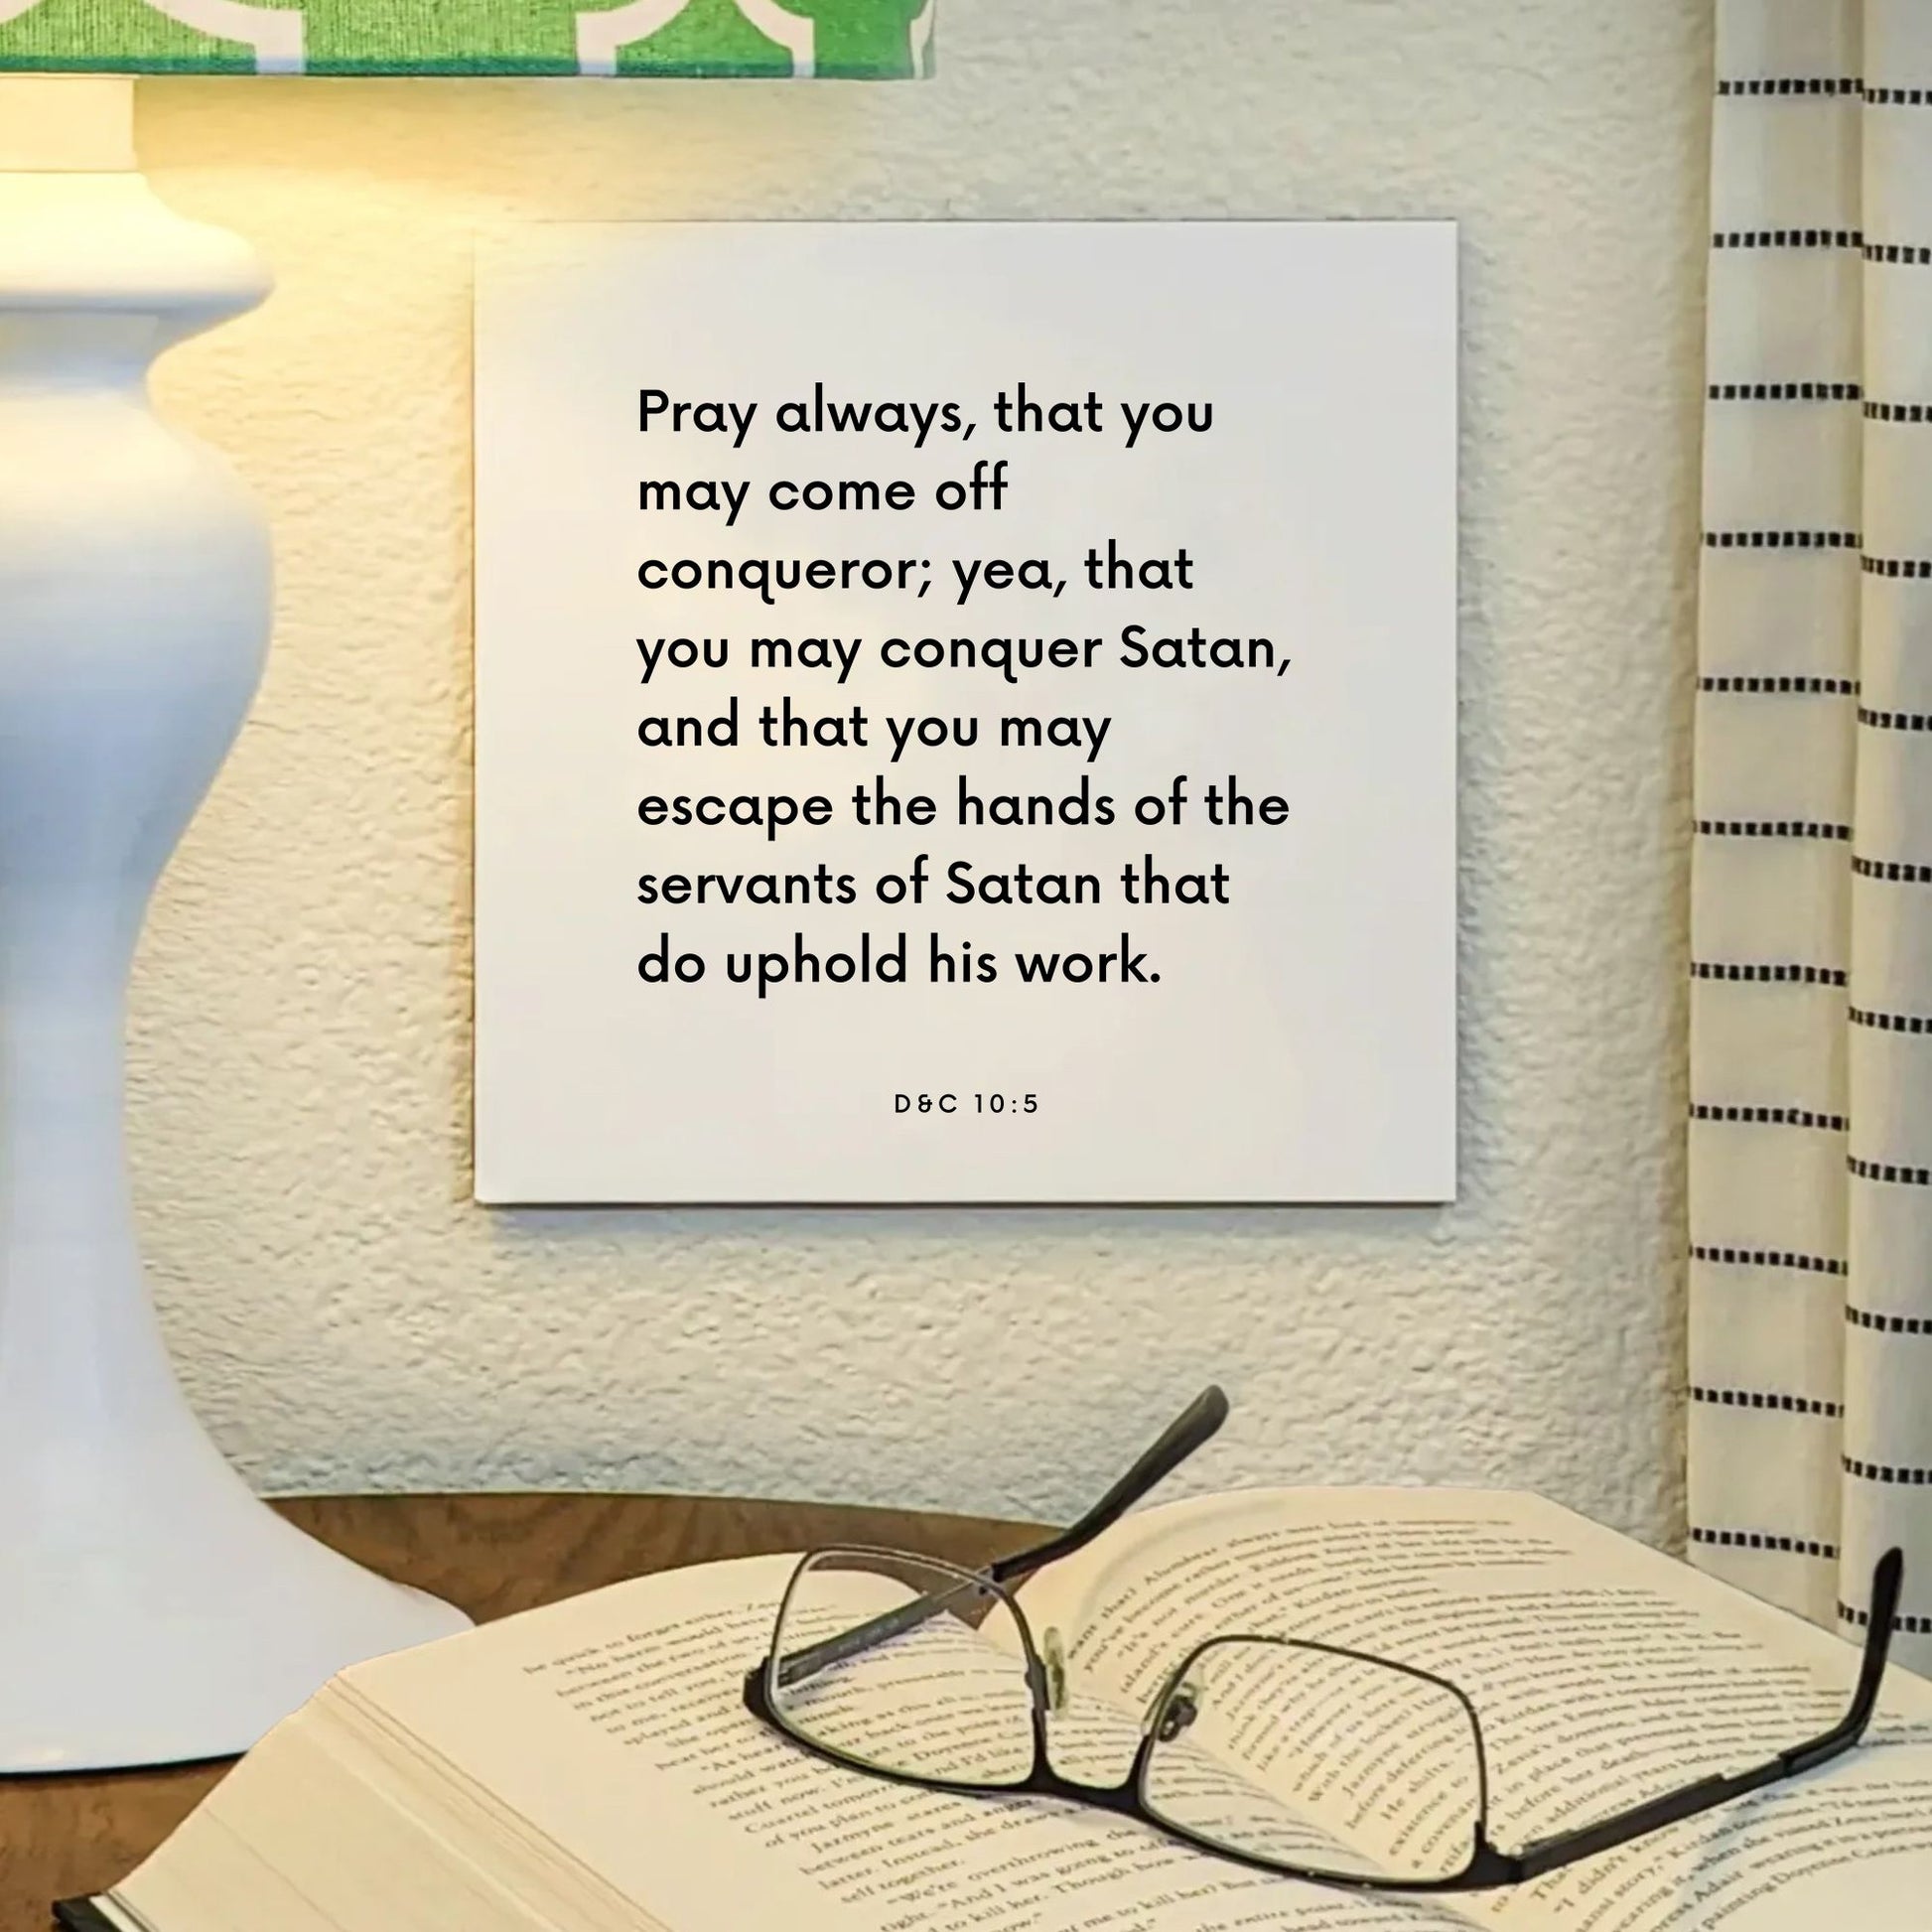 Lamp mouting of the scripture tile for D&C 10:5 - "Pray always, that you may come off conqueror"